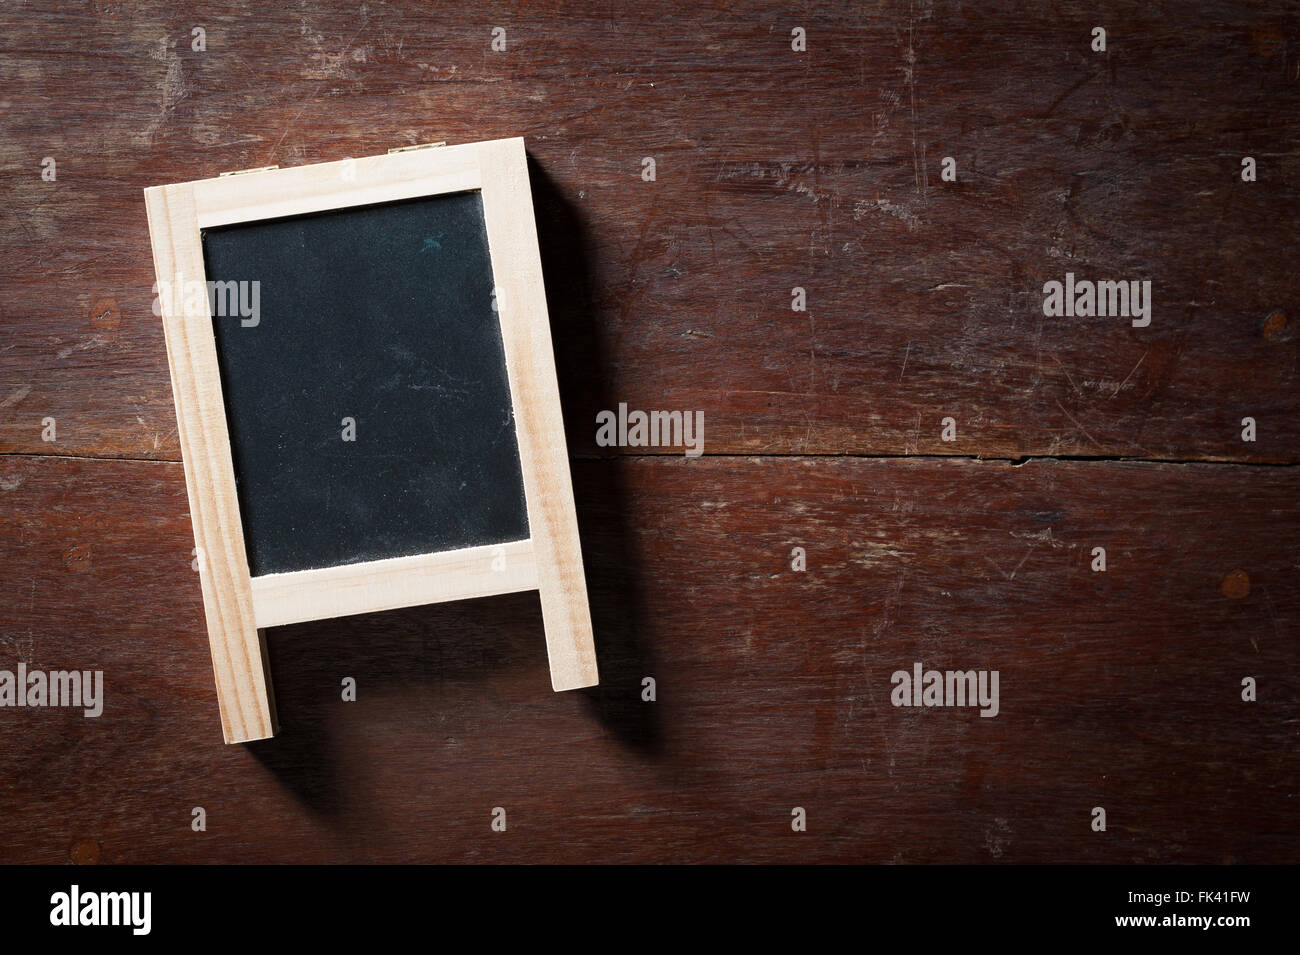 Small A-frame black board with blank area for text or message on rustic wood table with low key scene. Stock Photo